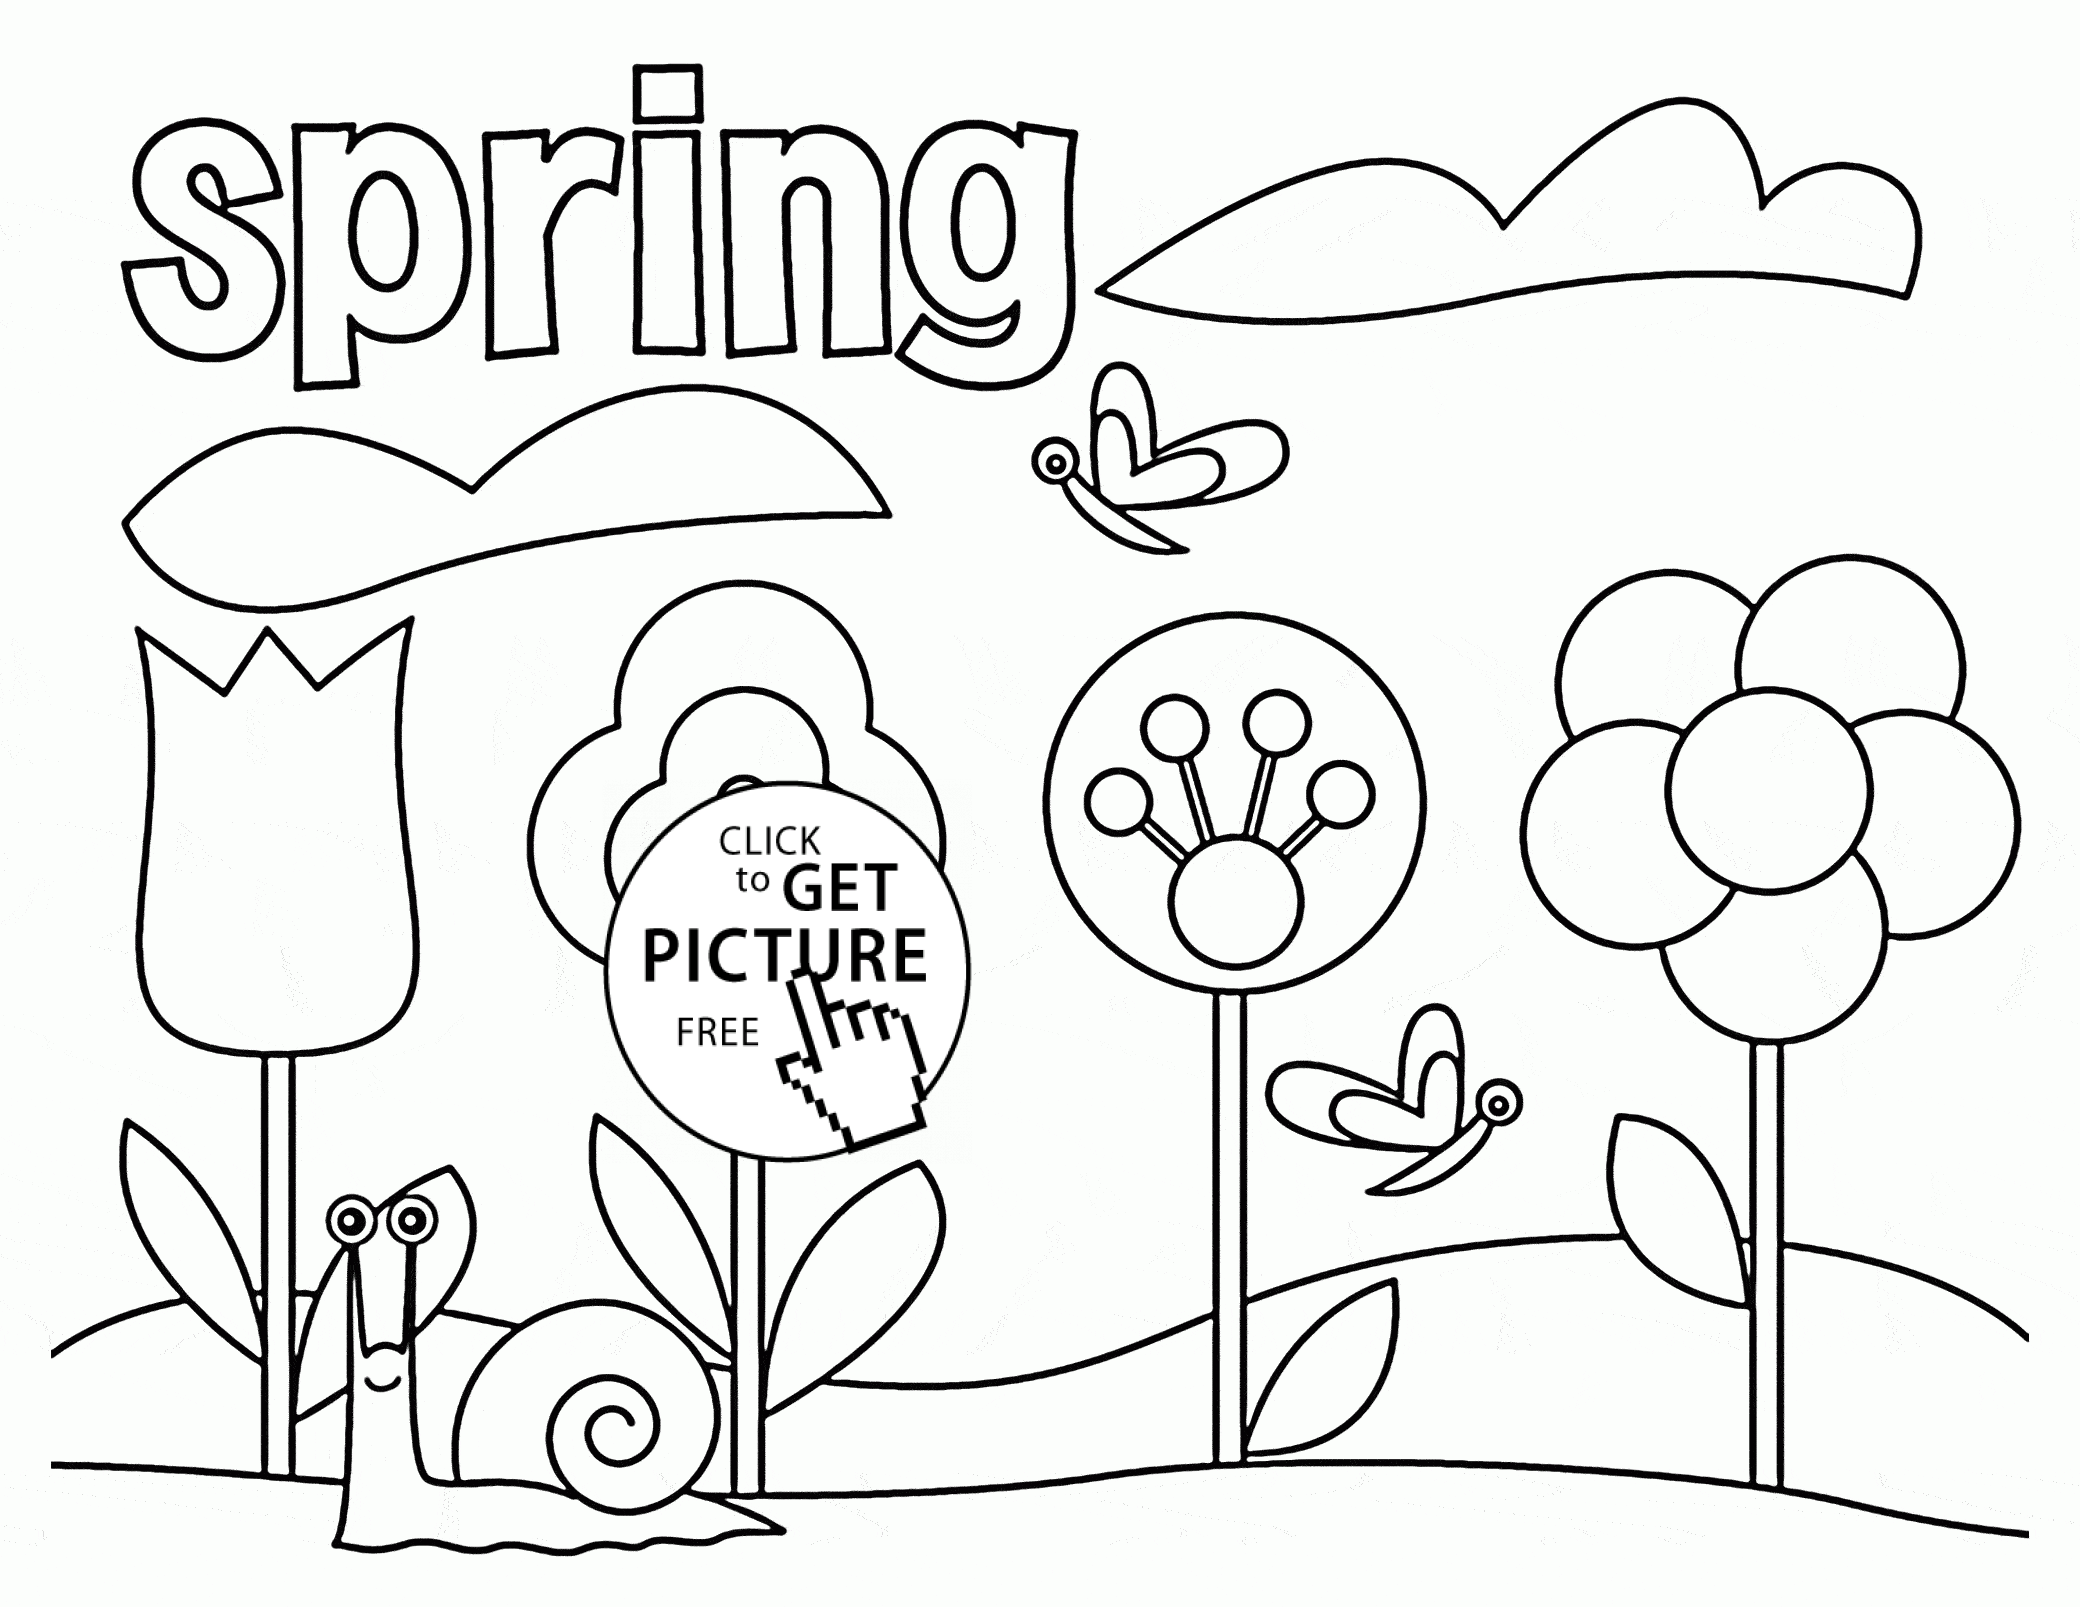 Spring Coloring Page For Kids, Seasons Coloring Pages Printables ...